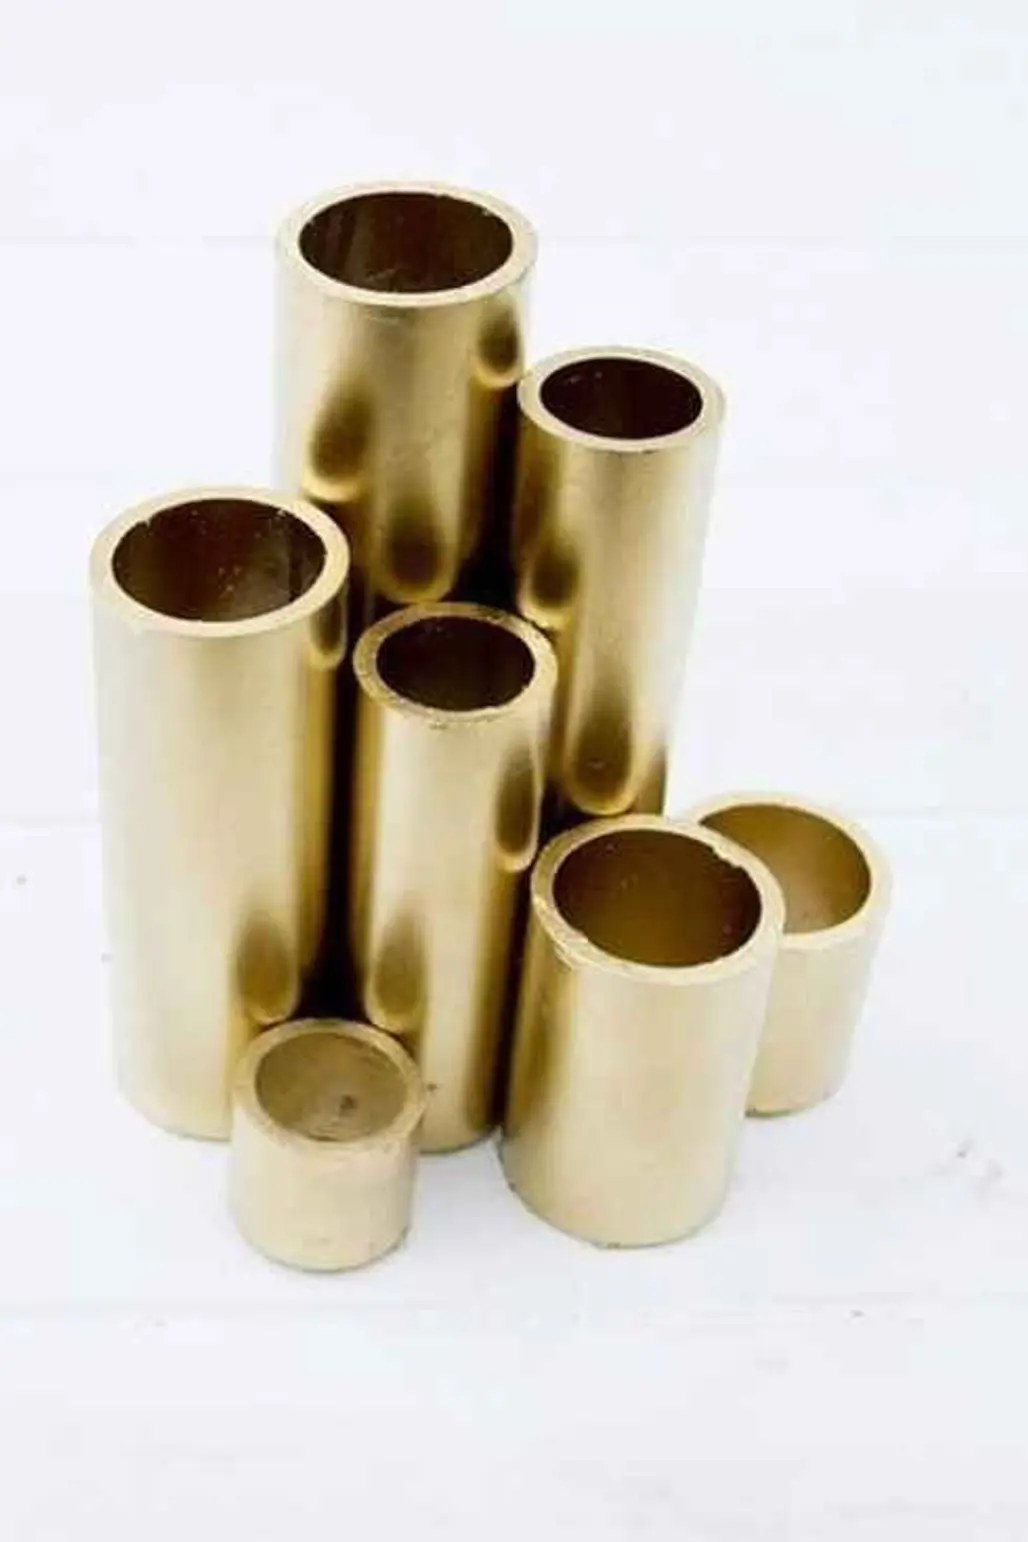 Spray Paint PVC Pipe for Gold Bookends